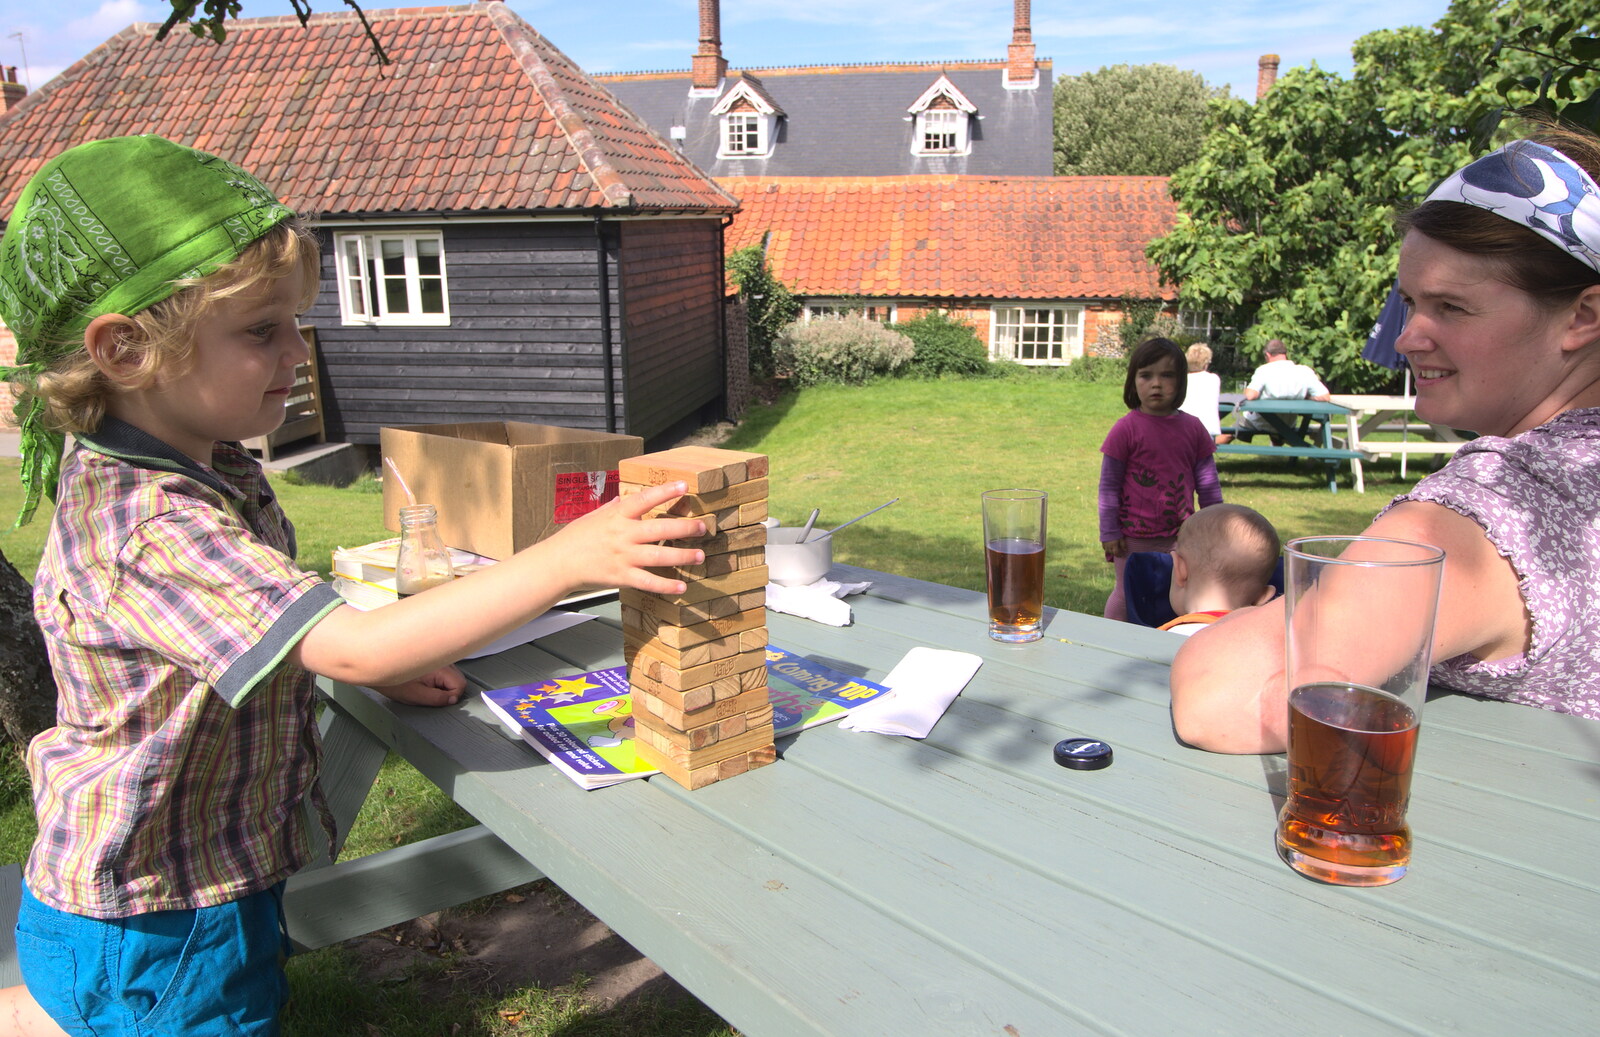 Jenga in the beer garden of the Dunwich Ship from Camping by the Seaside, Cliff House, Dunwich, Suffolk - 15th August 2012